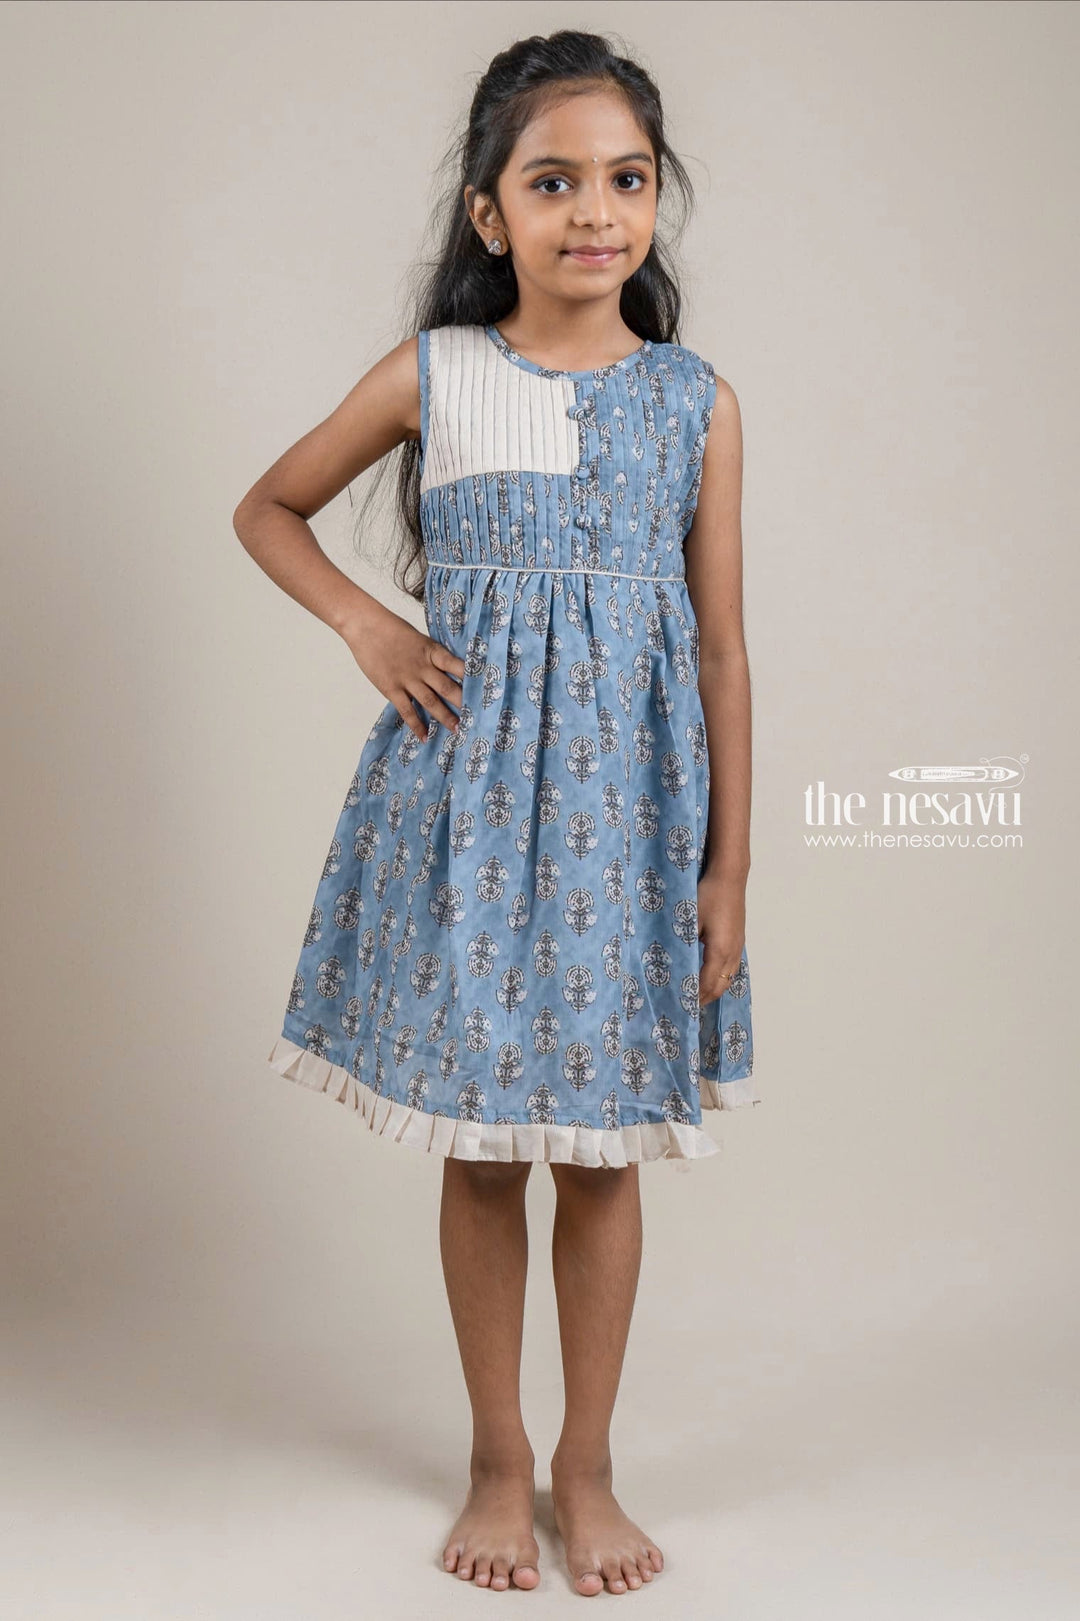 The Nesavu Girls Fancy Frock Adorable Hand Block Printed Sleeveless Blue Cotton Frock with Embellished Potli Button for Girls Nesavu 16 (1Y) / Blue / Cotton GFC1056A-16 Hand Block Printed Cotton Frock | Latest Cotton Frock | The Nesavu